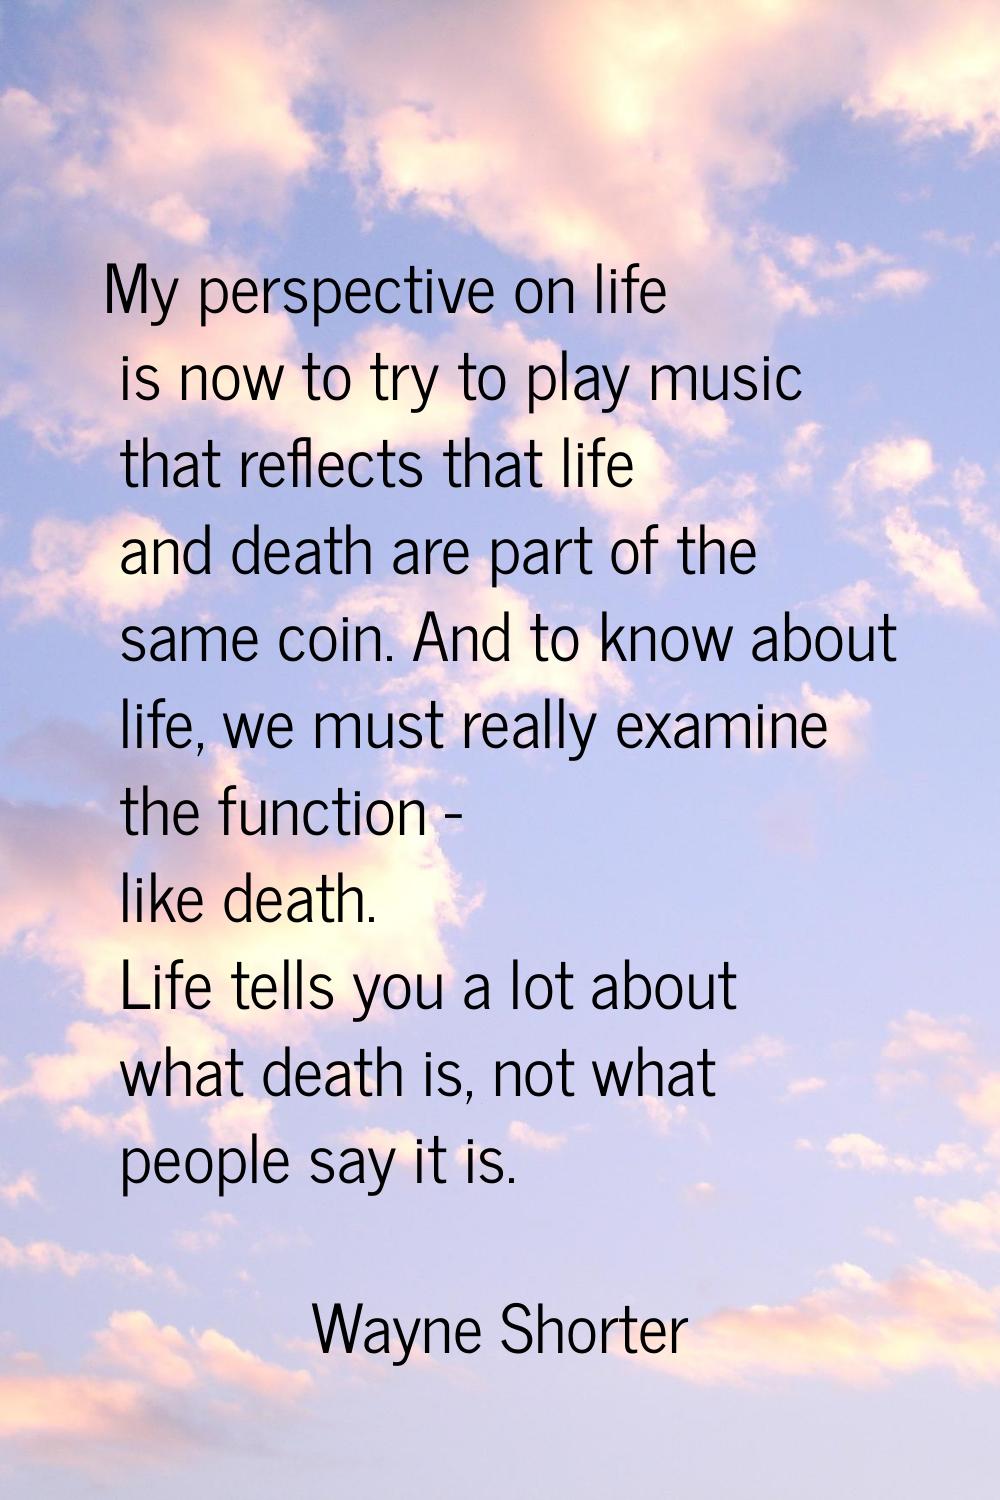 My perspective on life is now to try to play music that reflects that life and death are part of th